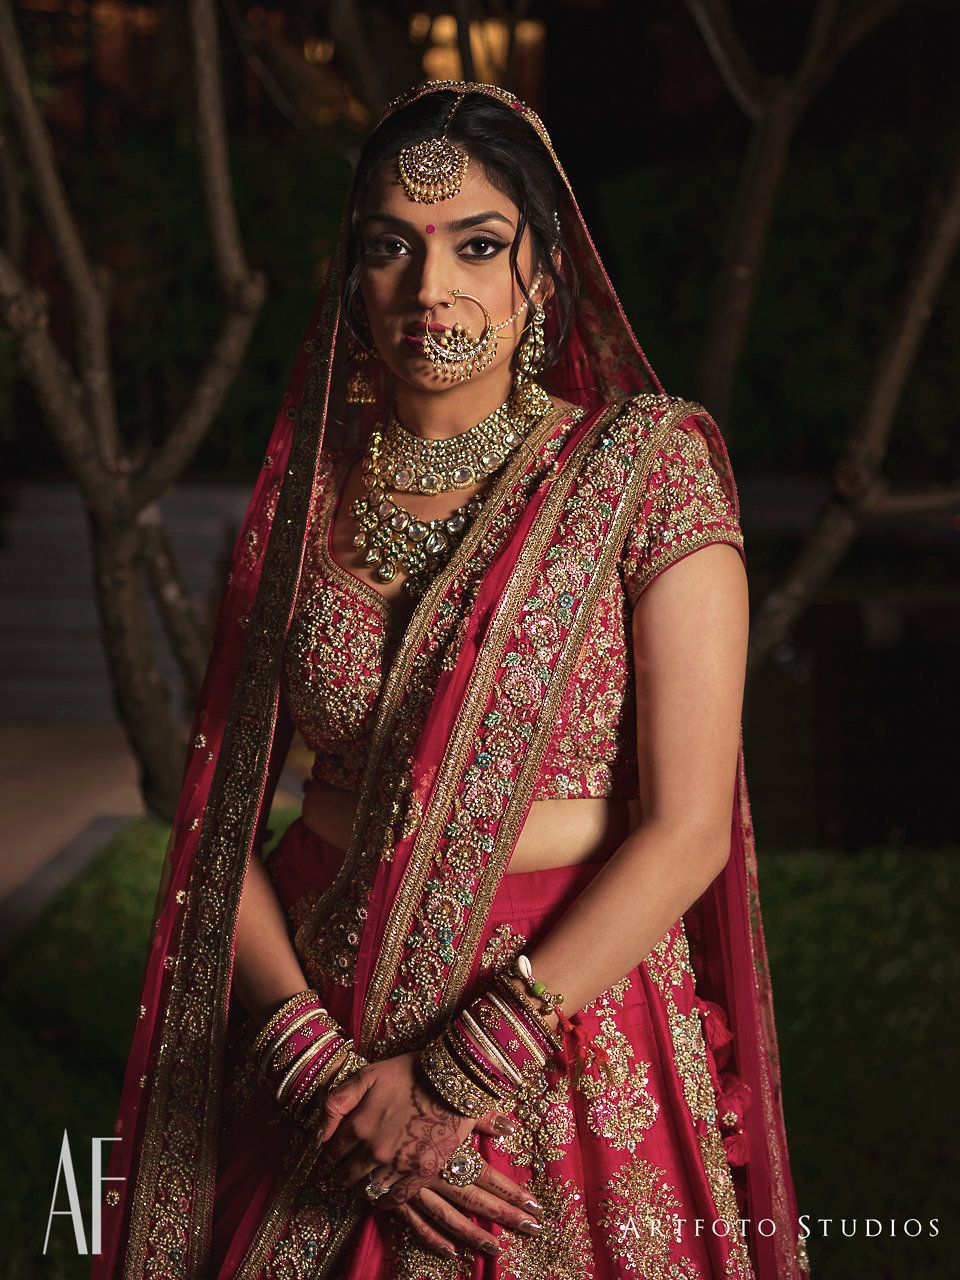 Photo of Bride looking regal in silver jewellery and red lehenga